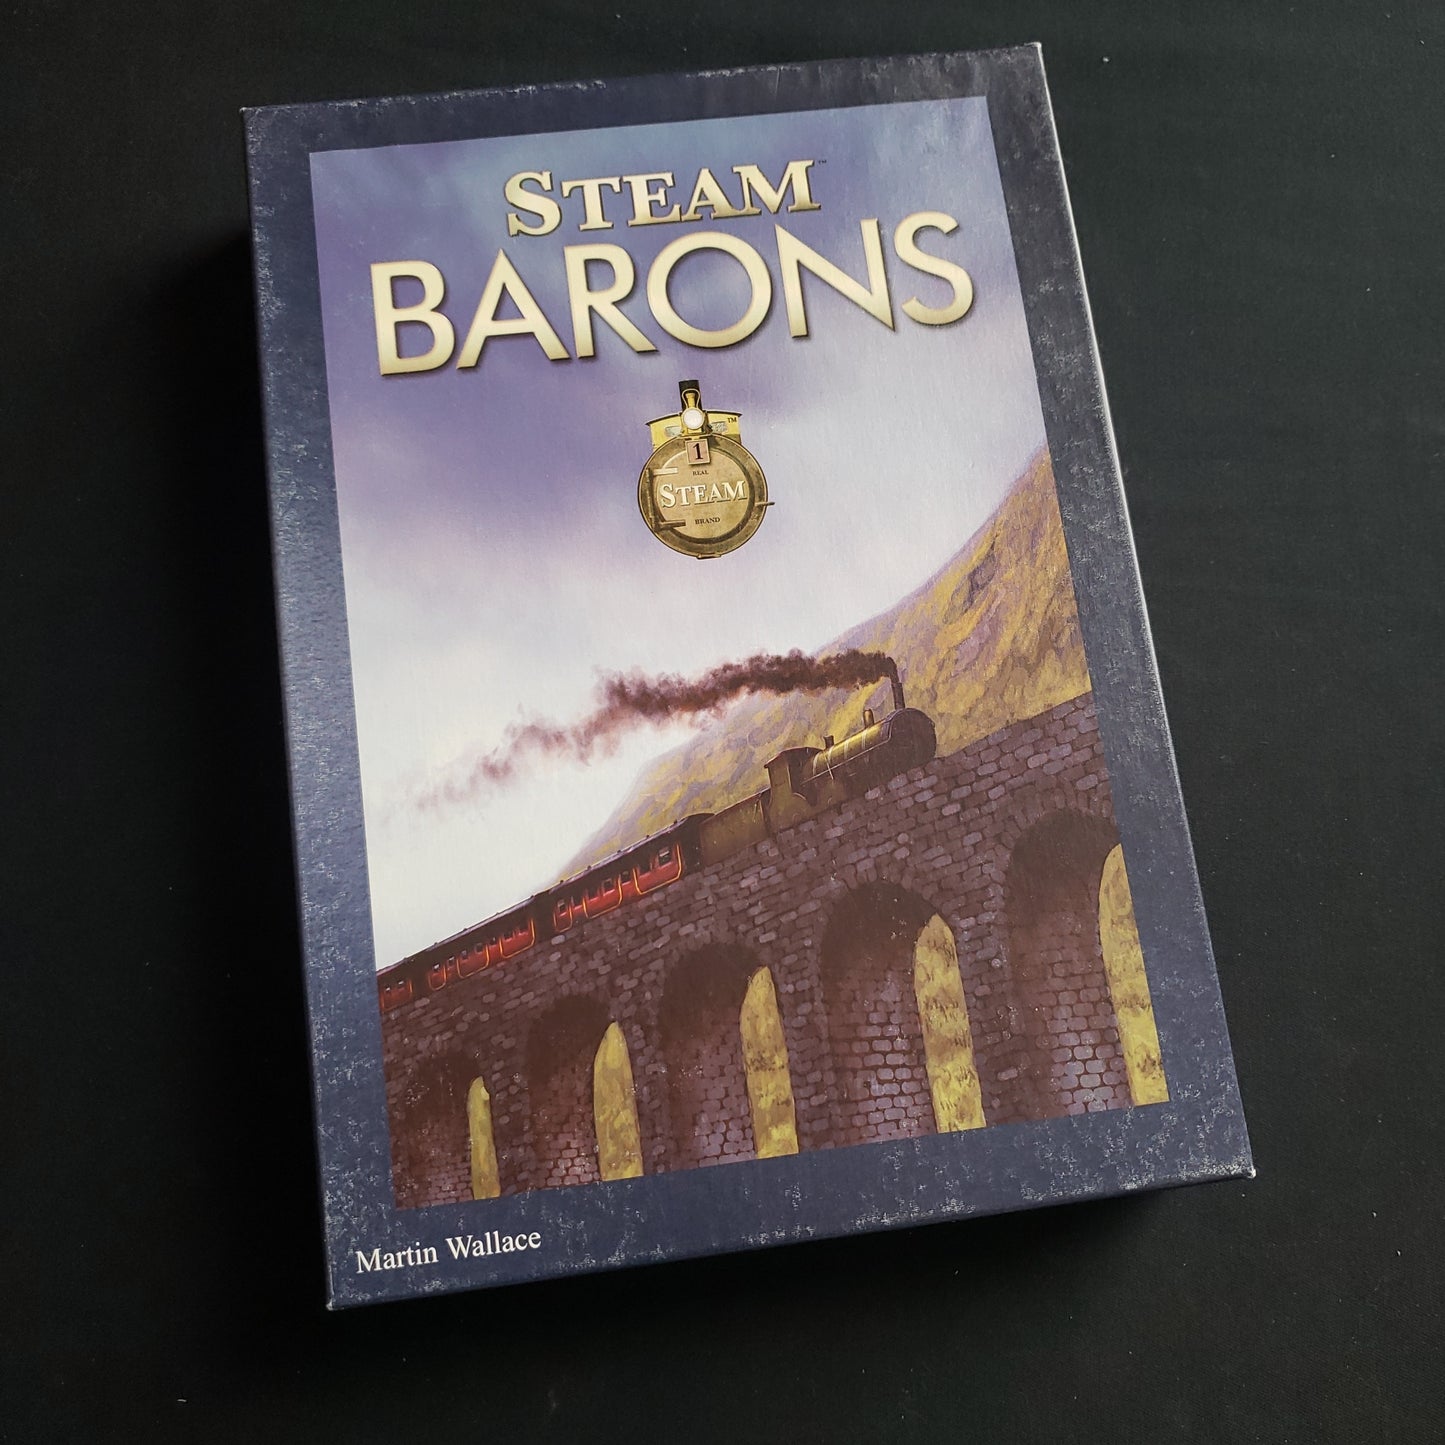 Image shows the front cover of the box of the Steam Barons expansion for the Steam board game